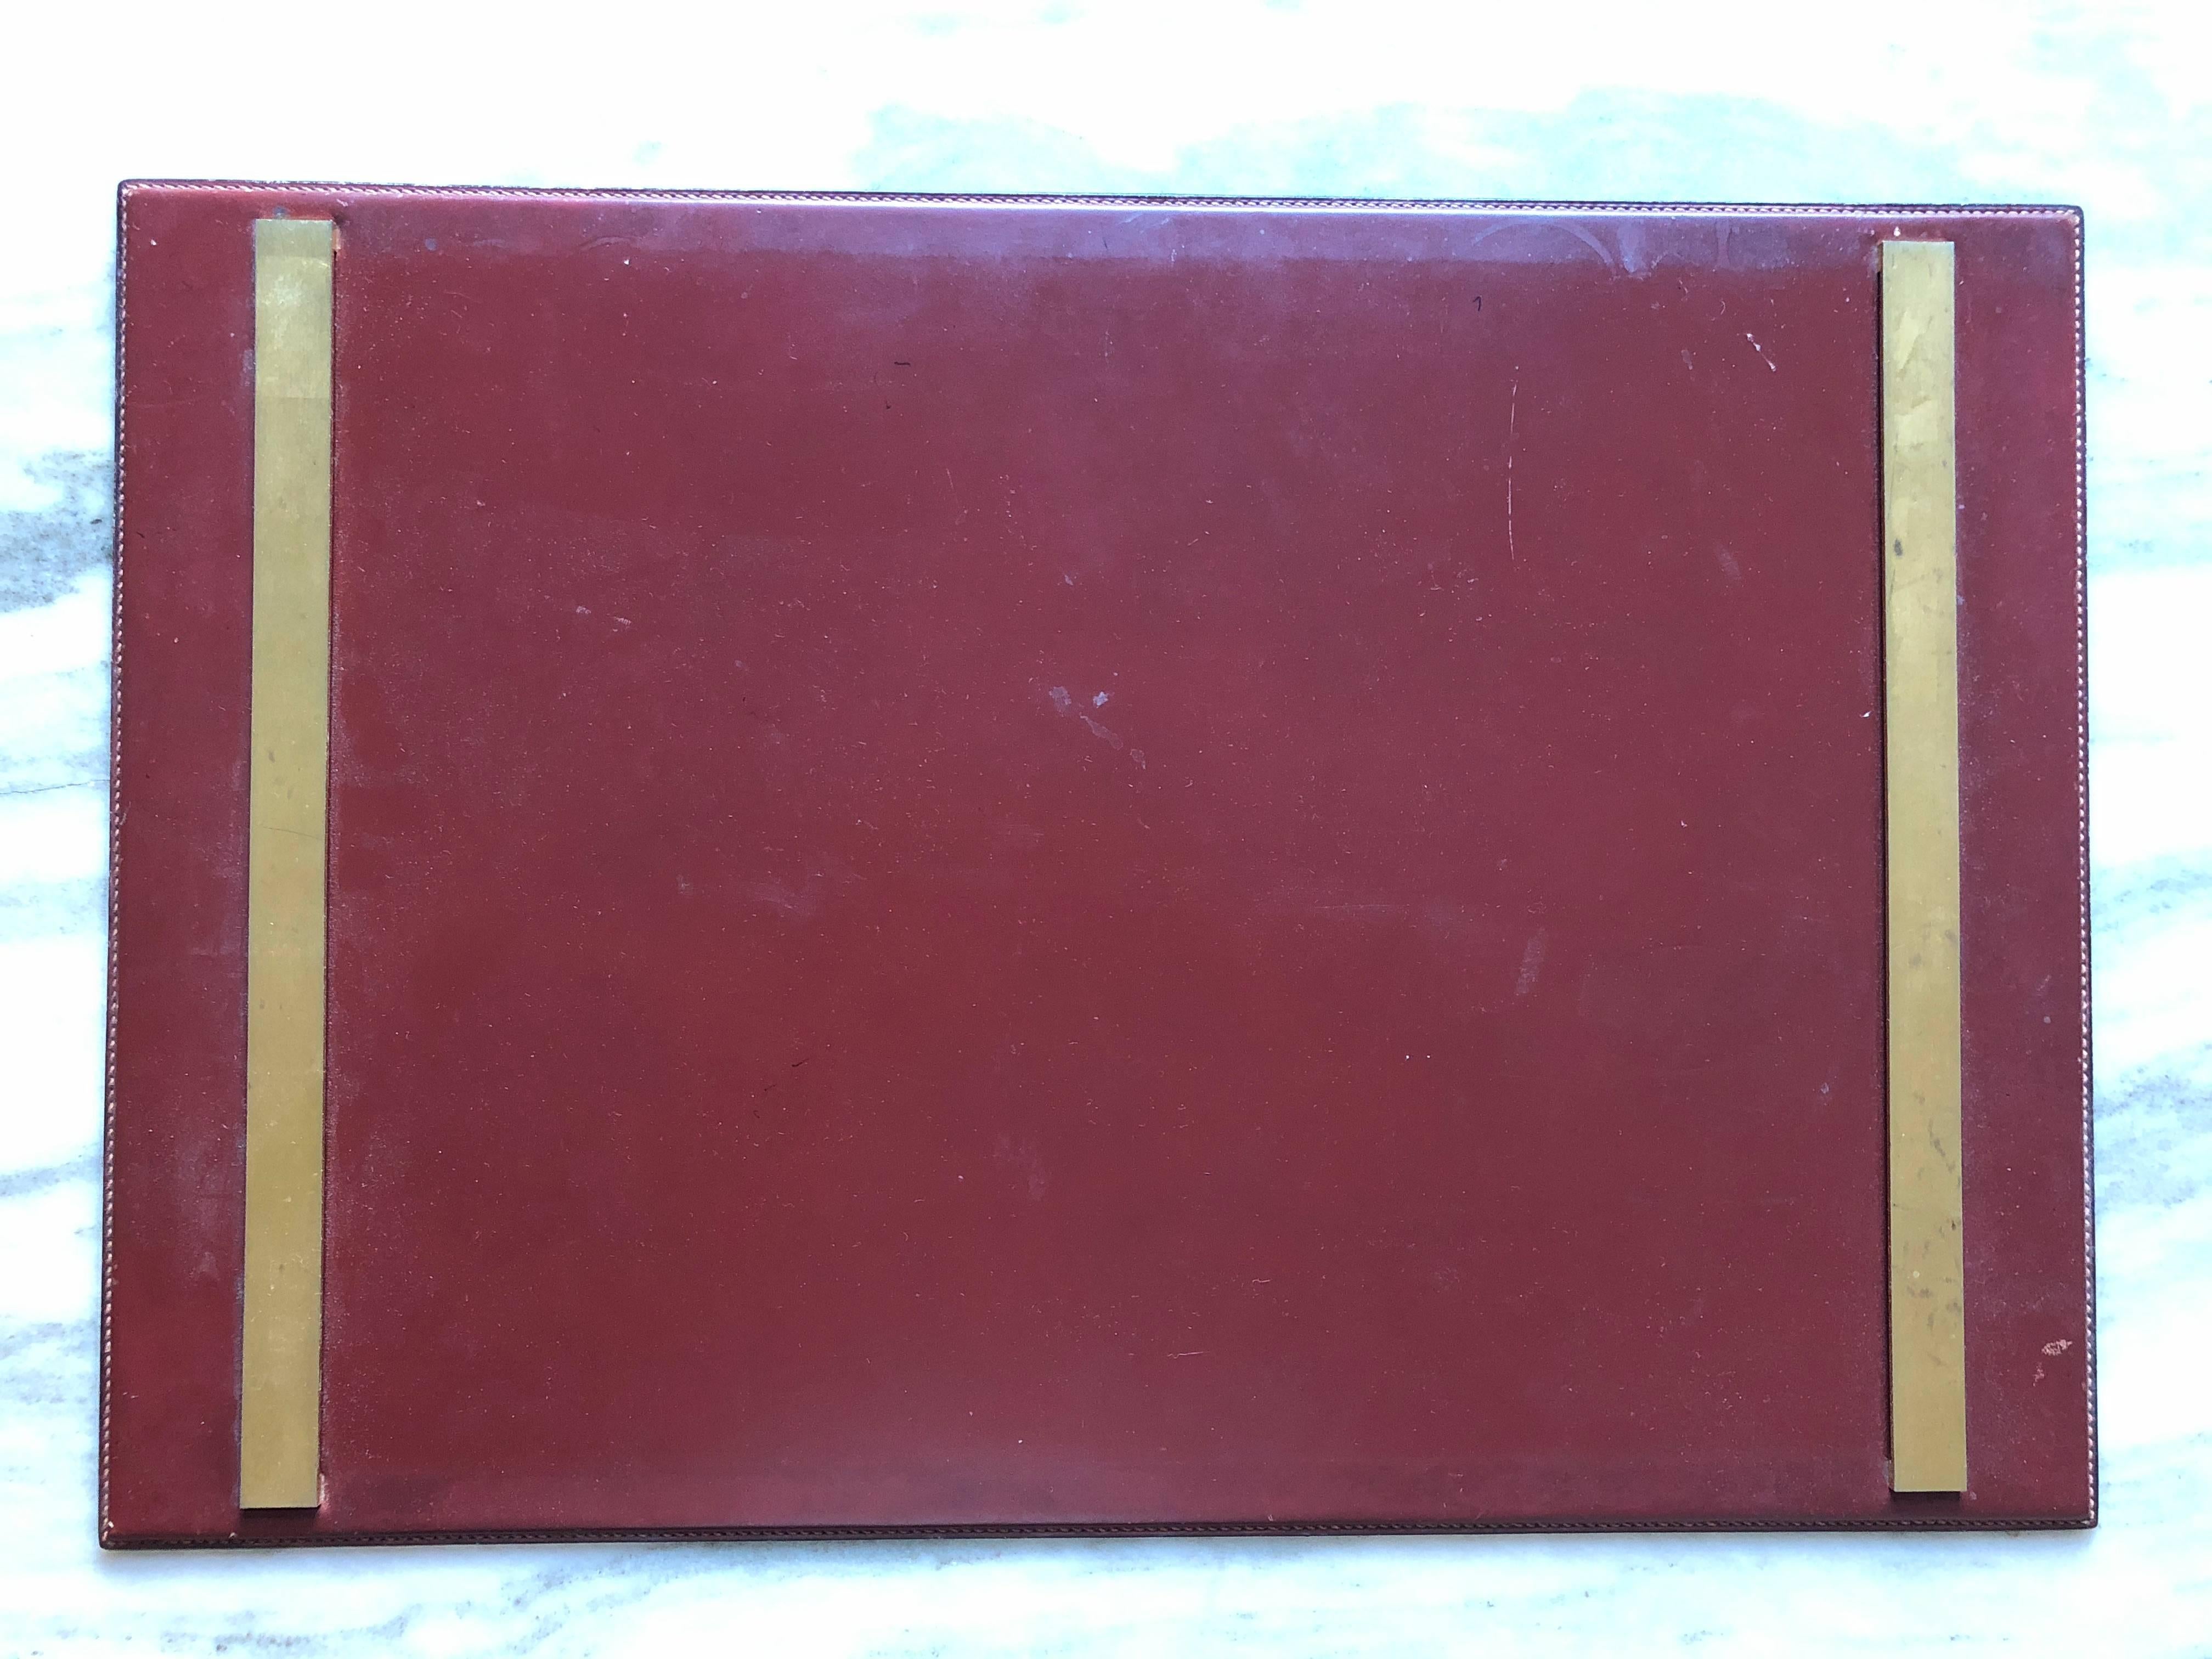 Stitched maroon leather with gilt bronze posts, circa 1960s. Gold foil stamp on verso.